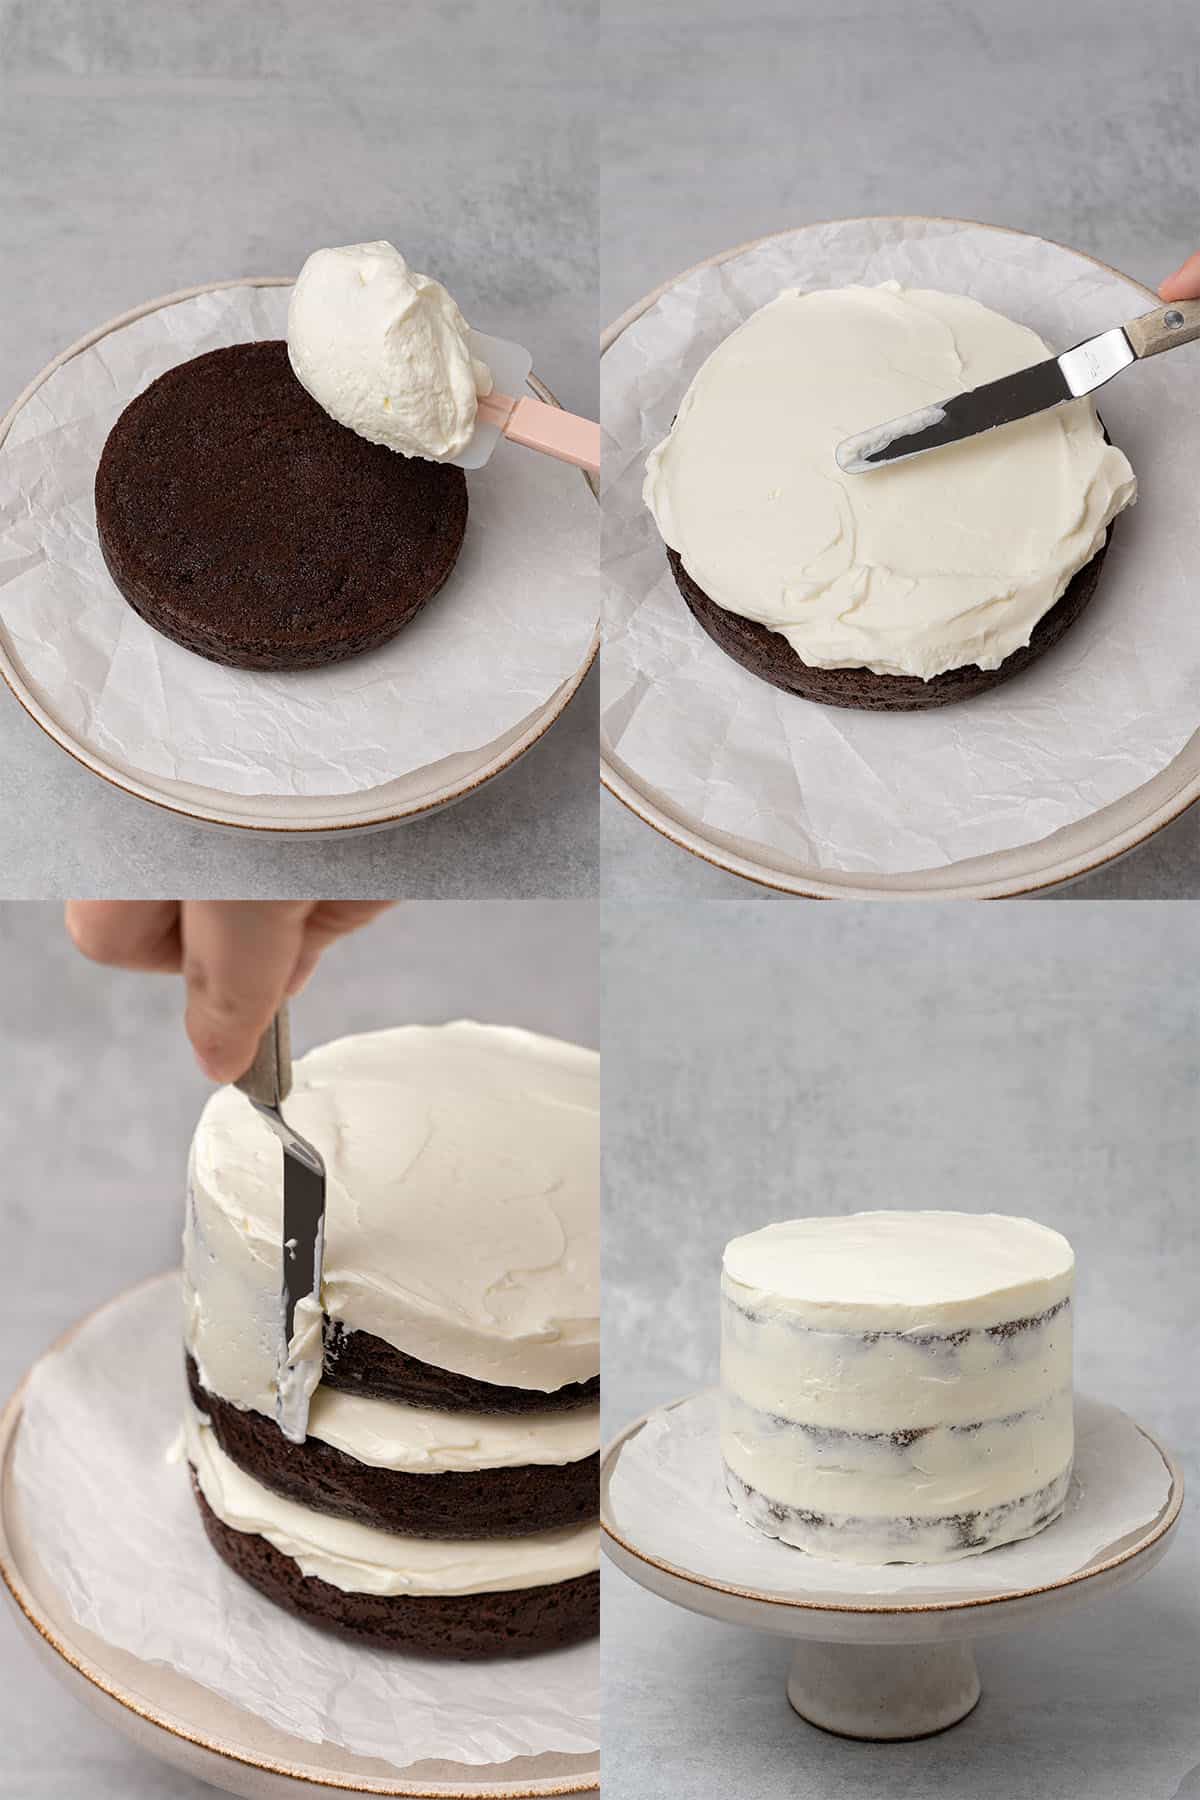 Chocolate cake with cream cheese frosting step-by-step assembly.